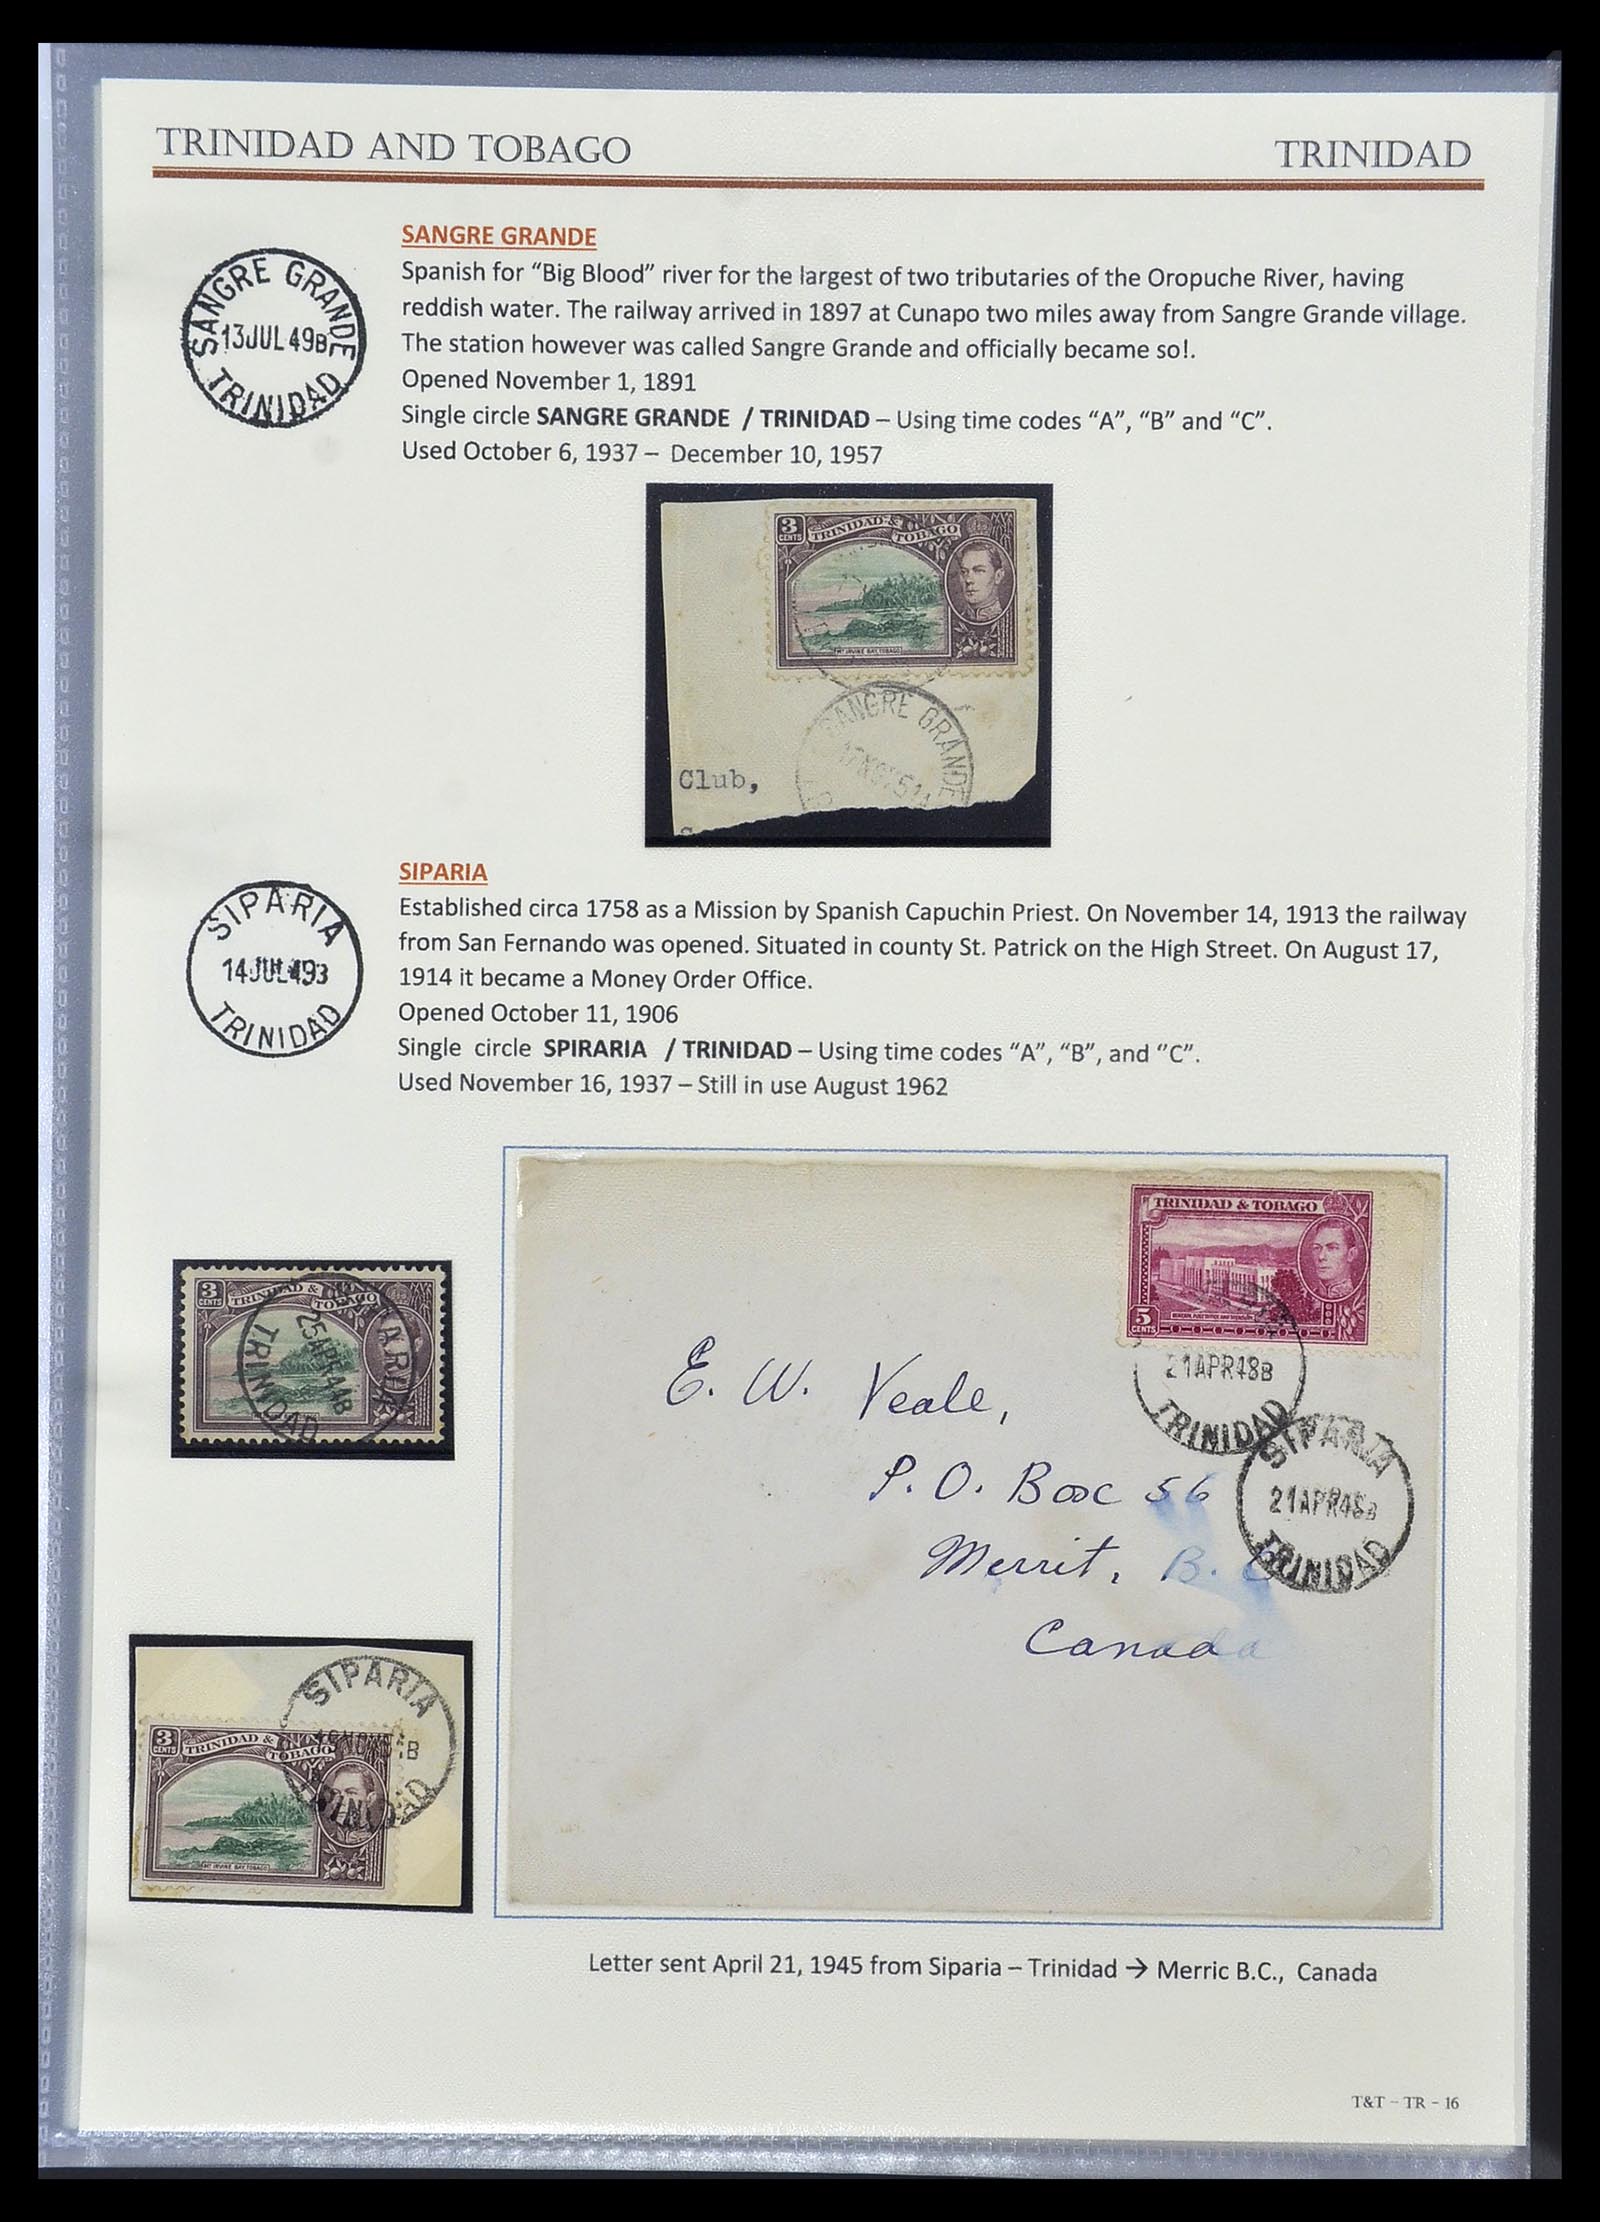 34527 034 - Stamp Collection 34527 Trinidad and Tobago cancels 1900-1956.